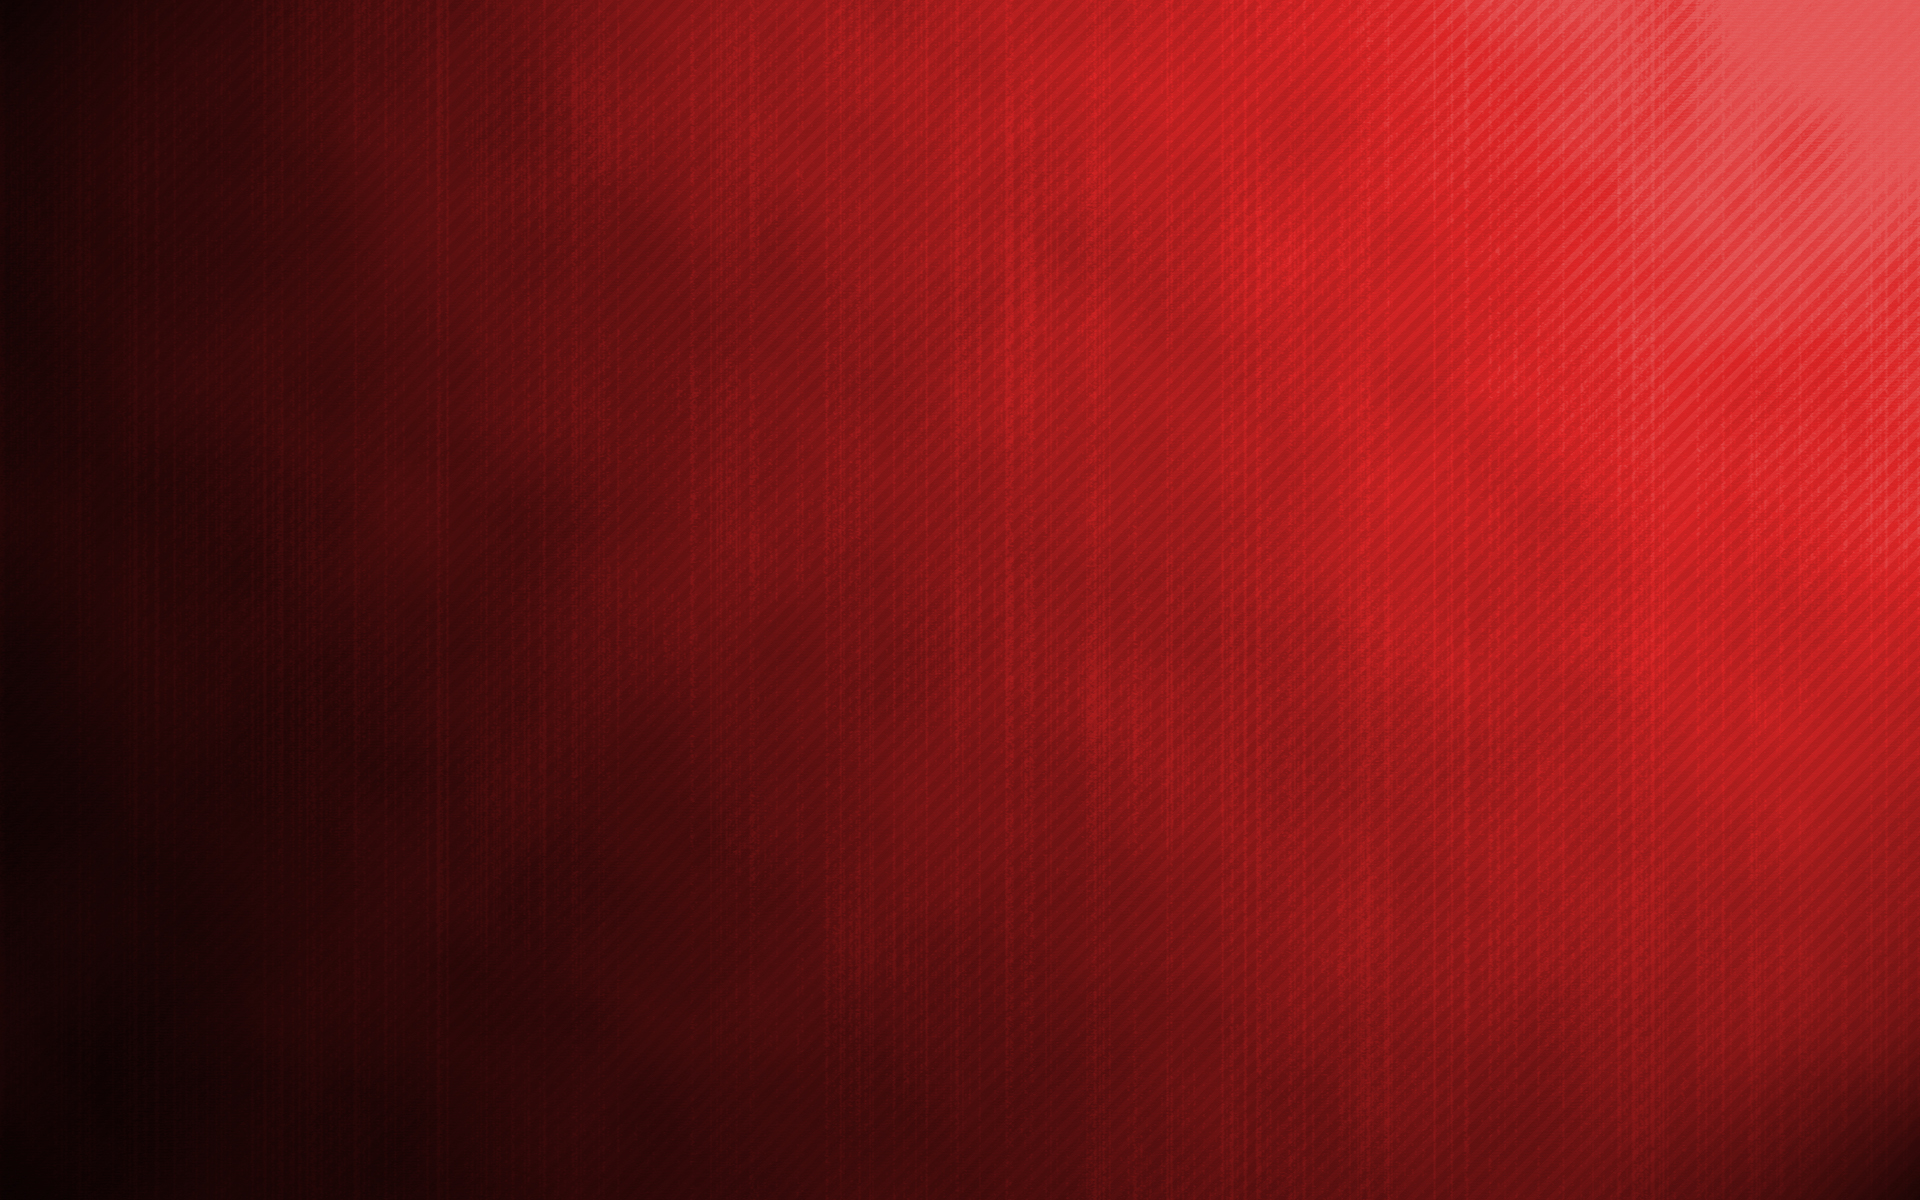 red backgrounds tumblr WallpaperSafari Background Red   Wallpapers